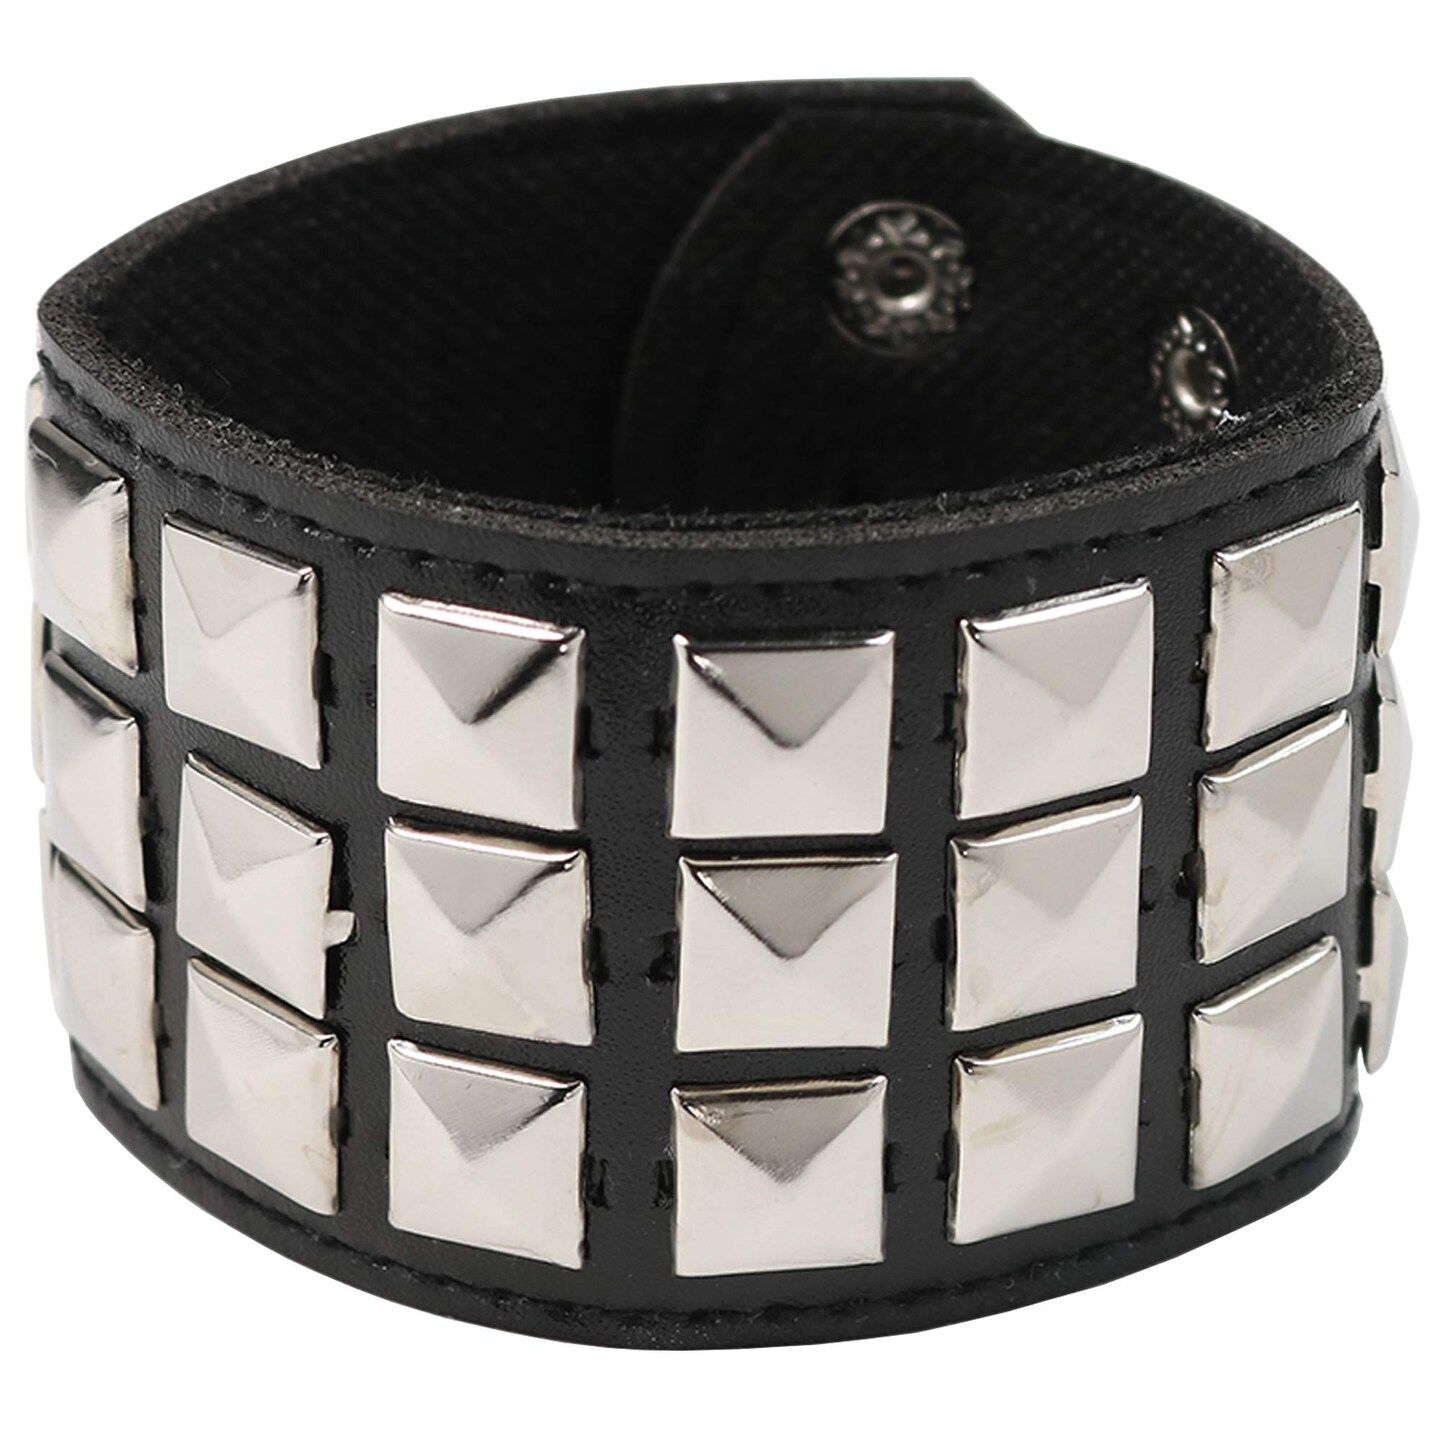 Stylish Faux Leather Cuff for Men: Elevate Your Look with This Chic Accessory